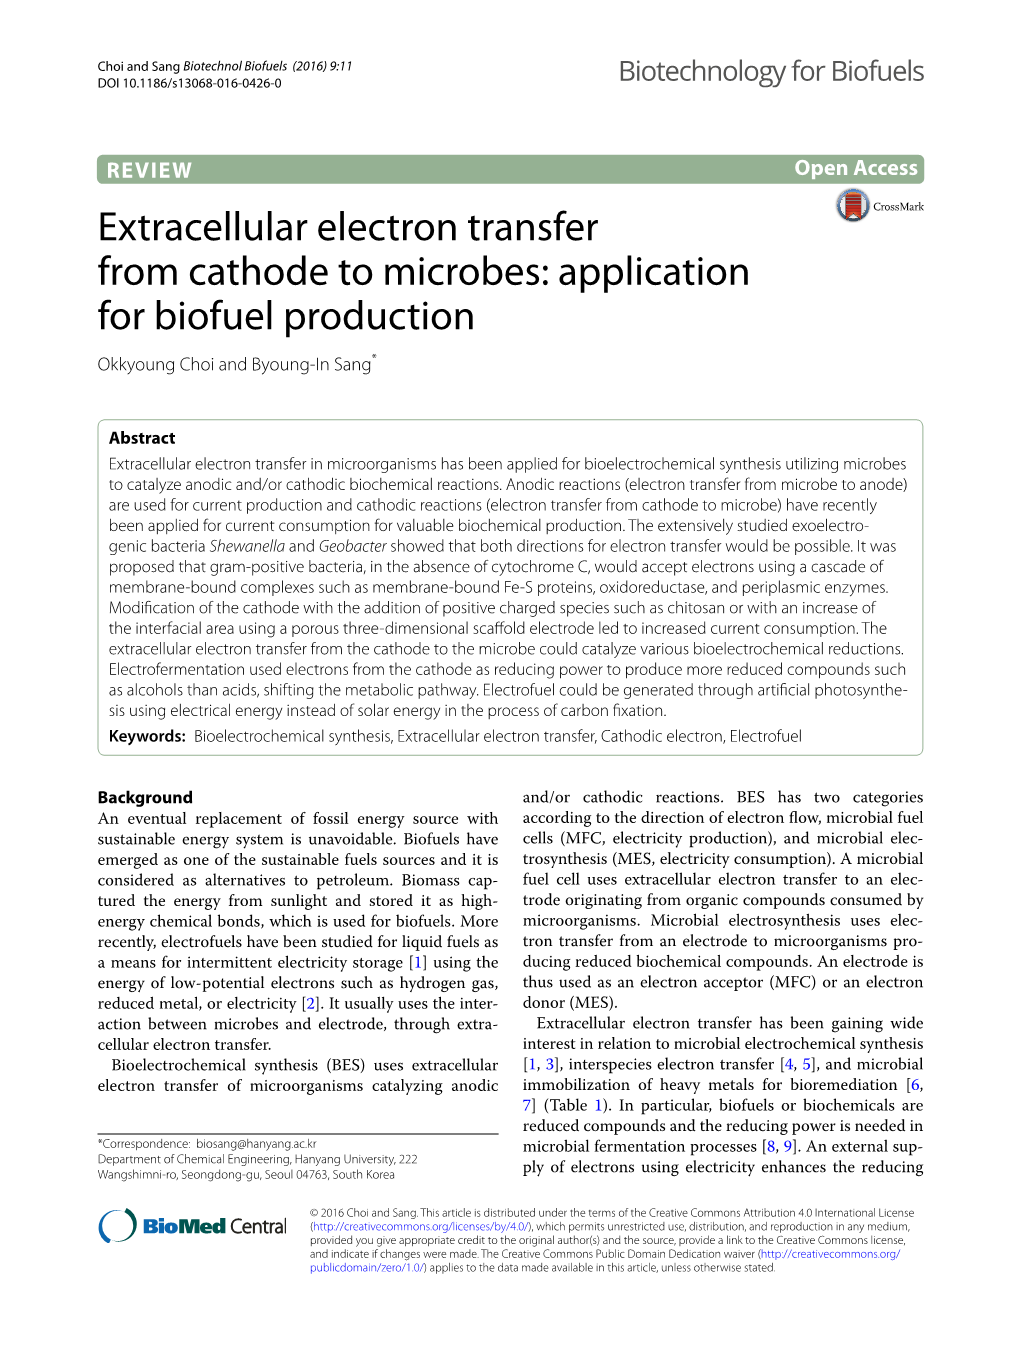 Extracellular Electron Transfer from Cathode to Microbes: Application for Biofuel Production Okkyoung Choi and Byoung‑In Sang*